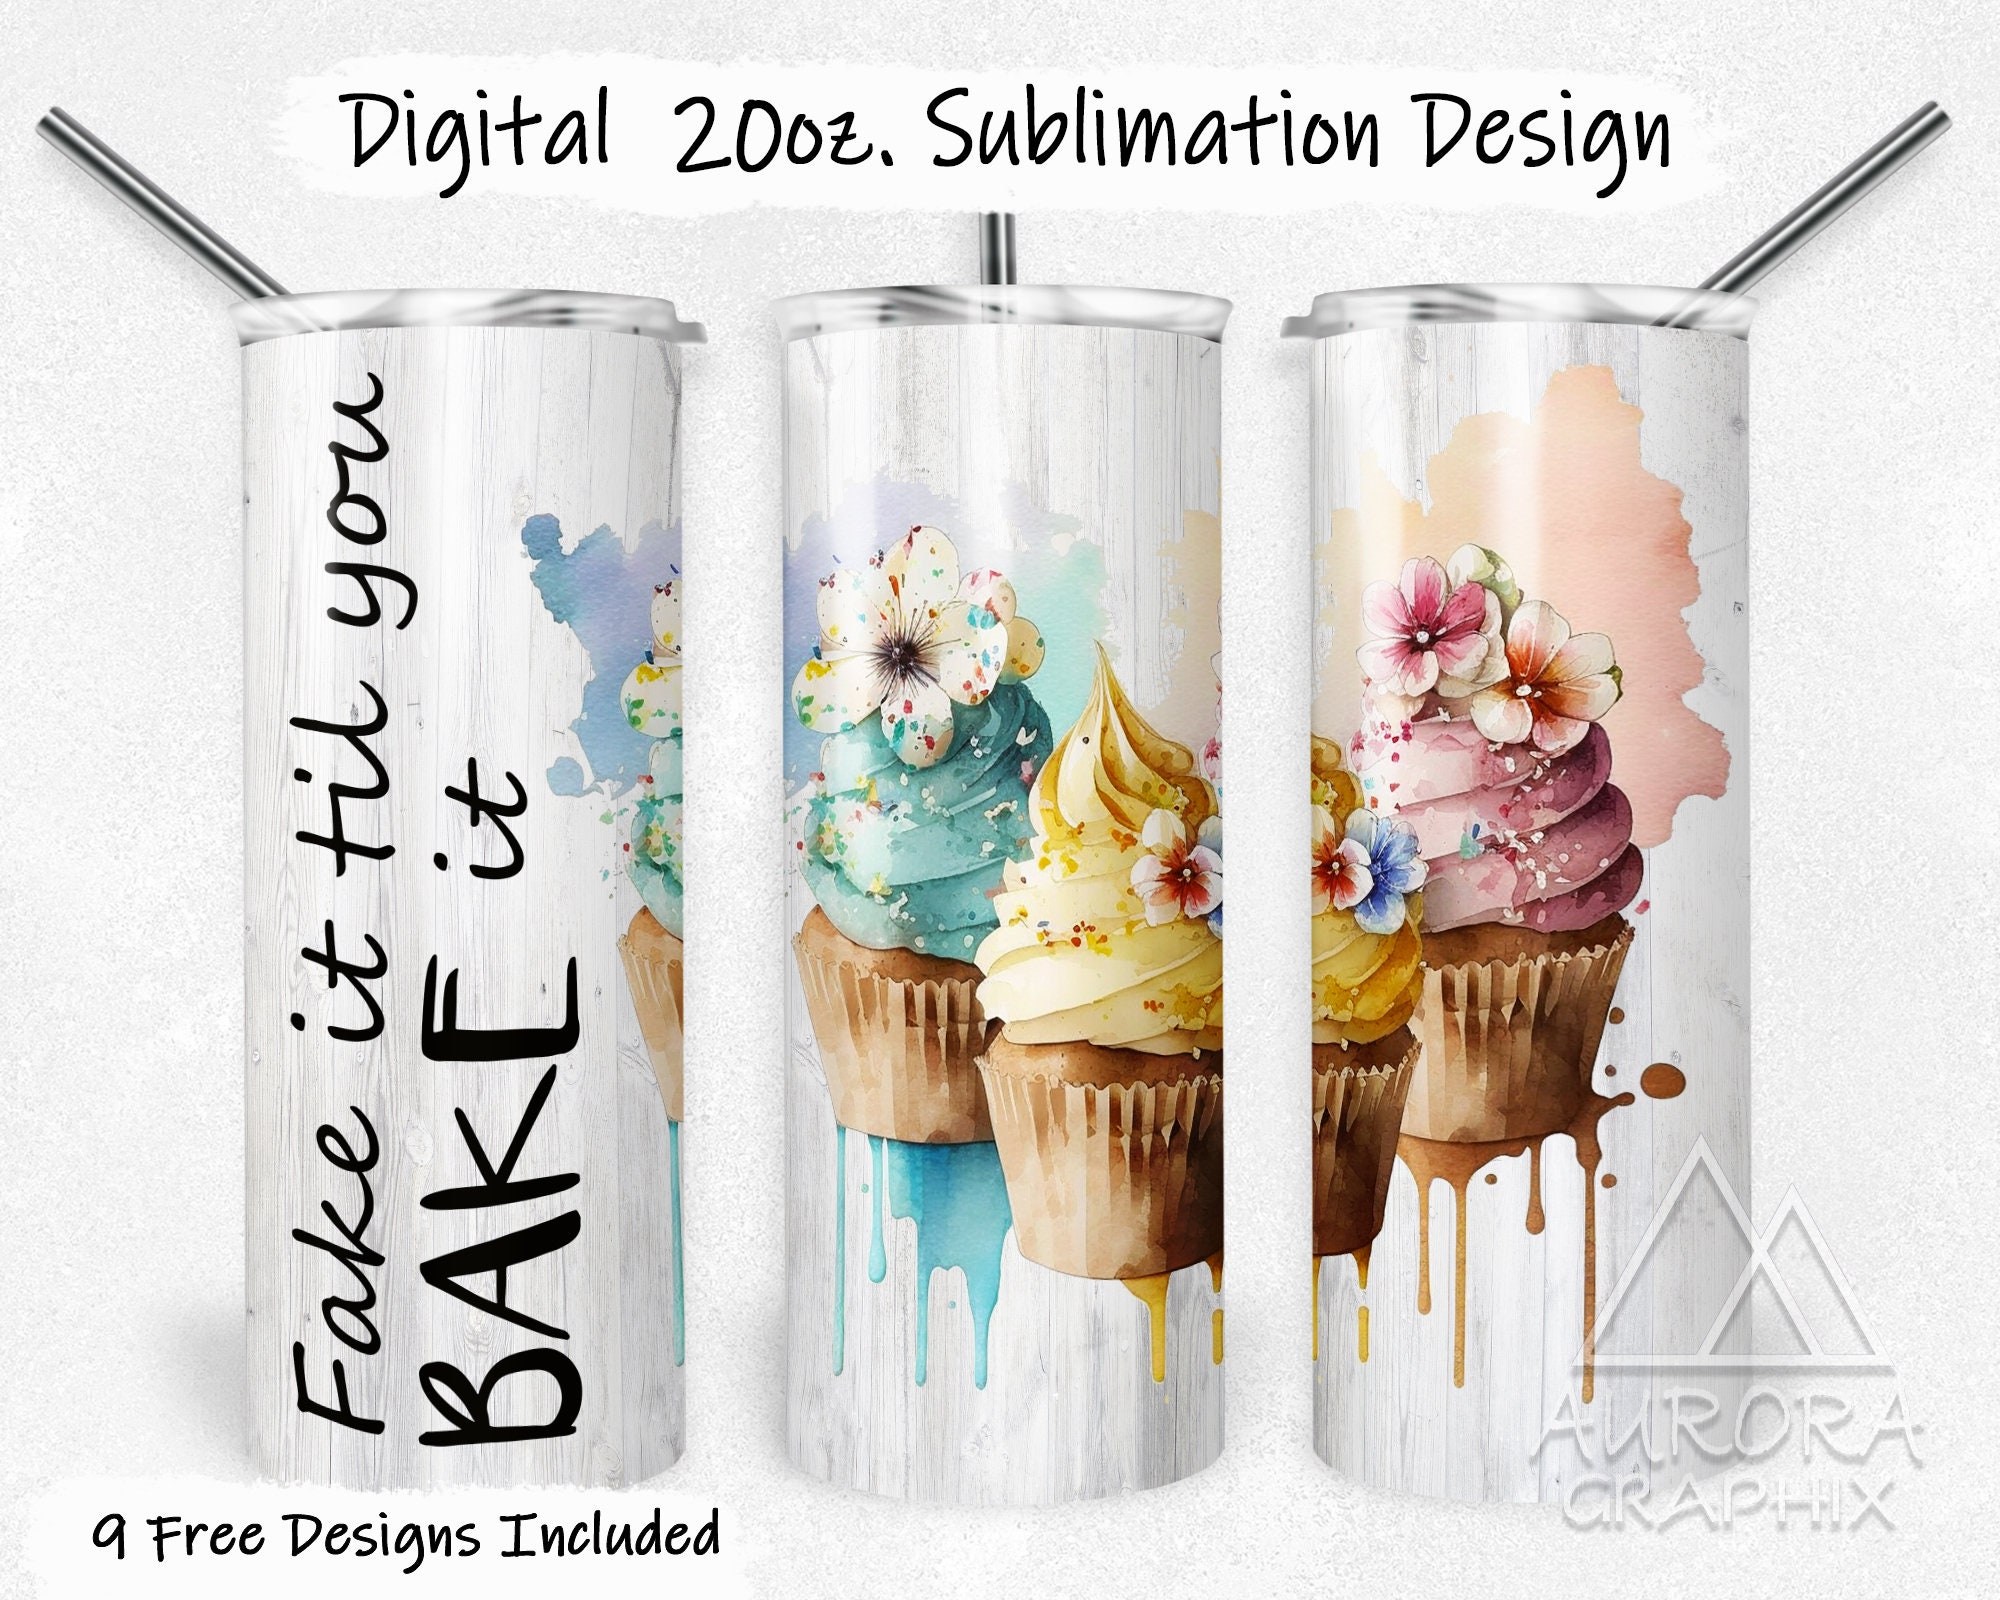 Baking is My Therapy, Printed Sublimation 20 oz Tumbler Wraps, Ready-t –  Brush and Bristle Studio